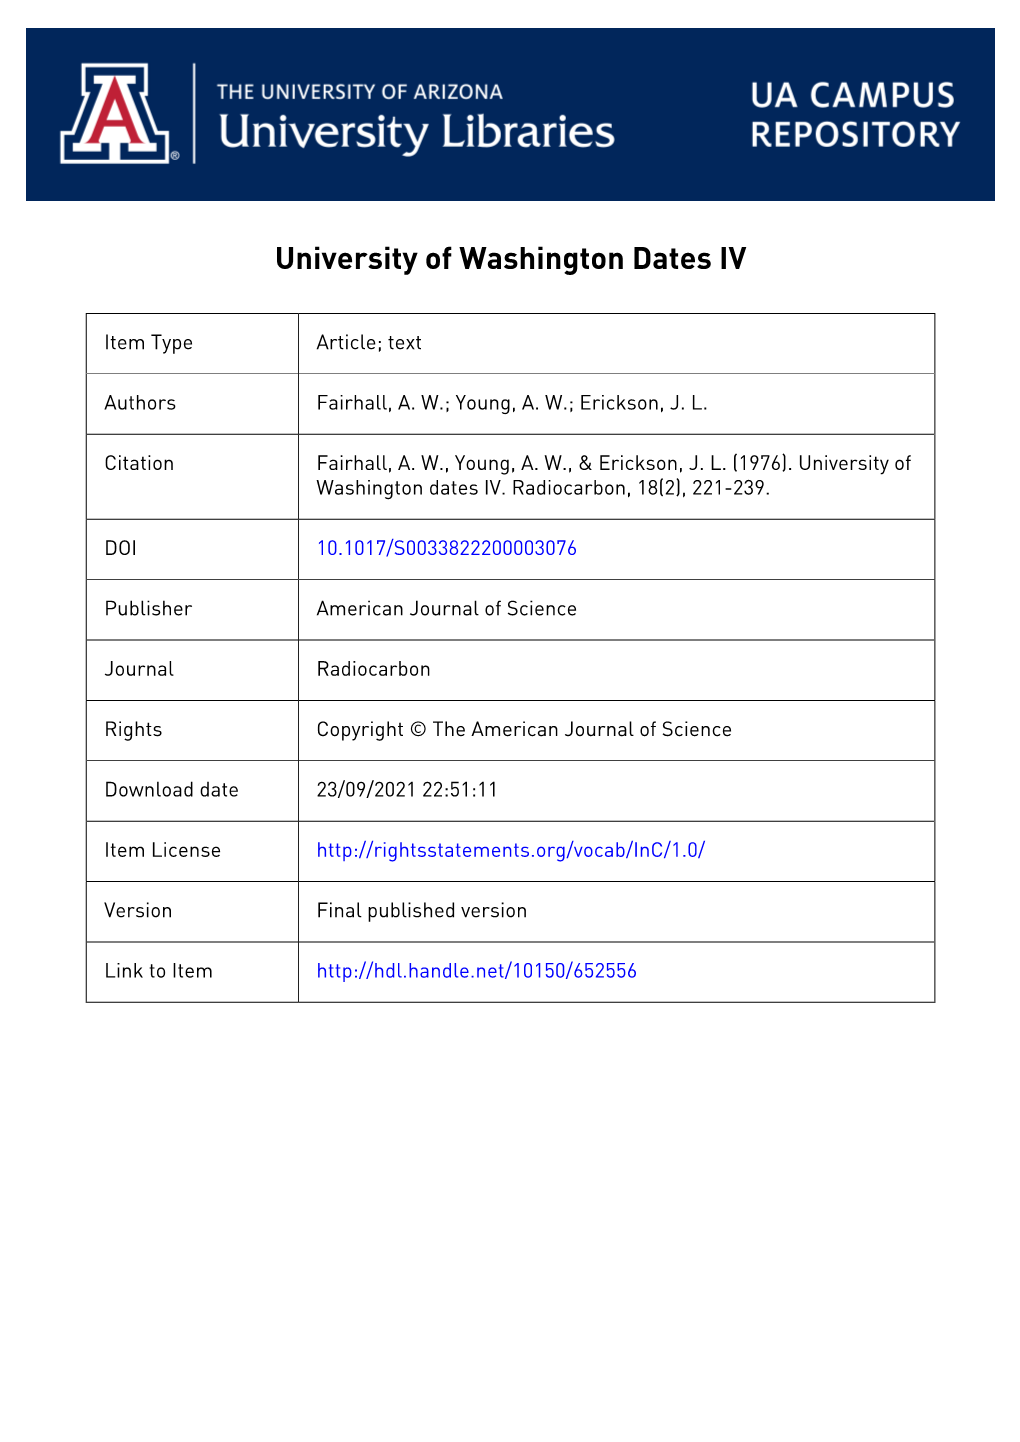 UNIVERSITY of WASHINGTON DATES IV a W FAIRHALL, a W YOUNG, and J L ERICKSON Department of Chemistry, University of Washington, Seattle, Washington 98195